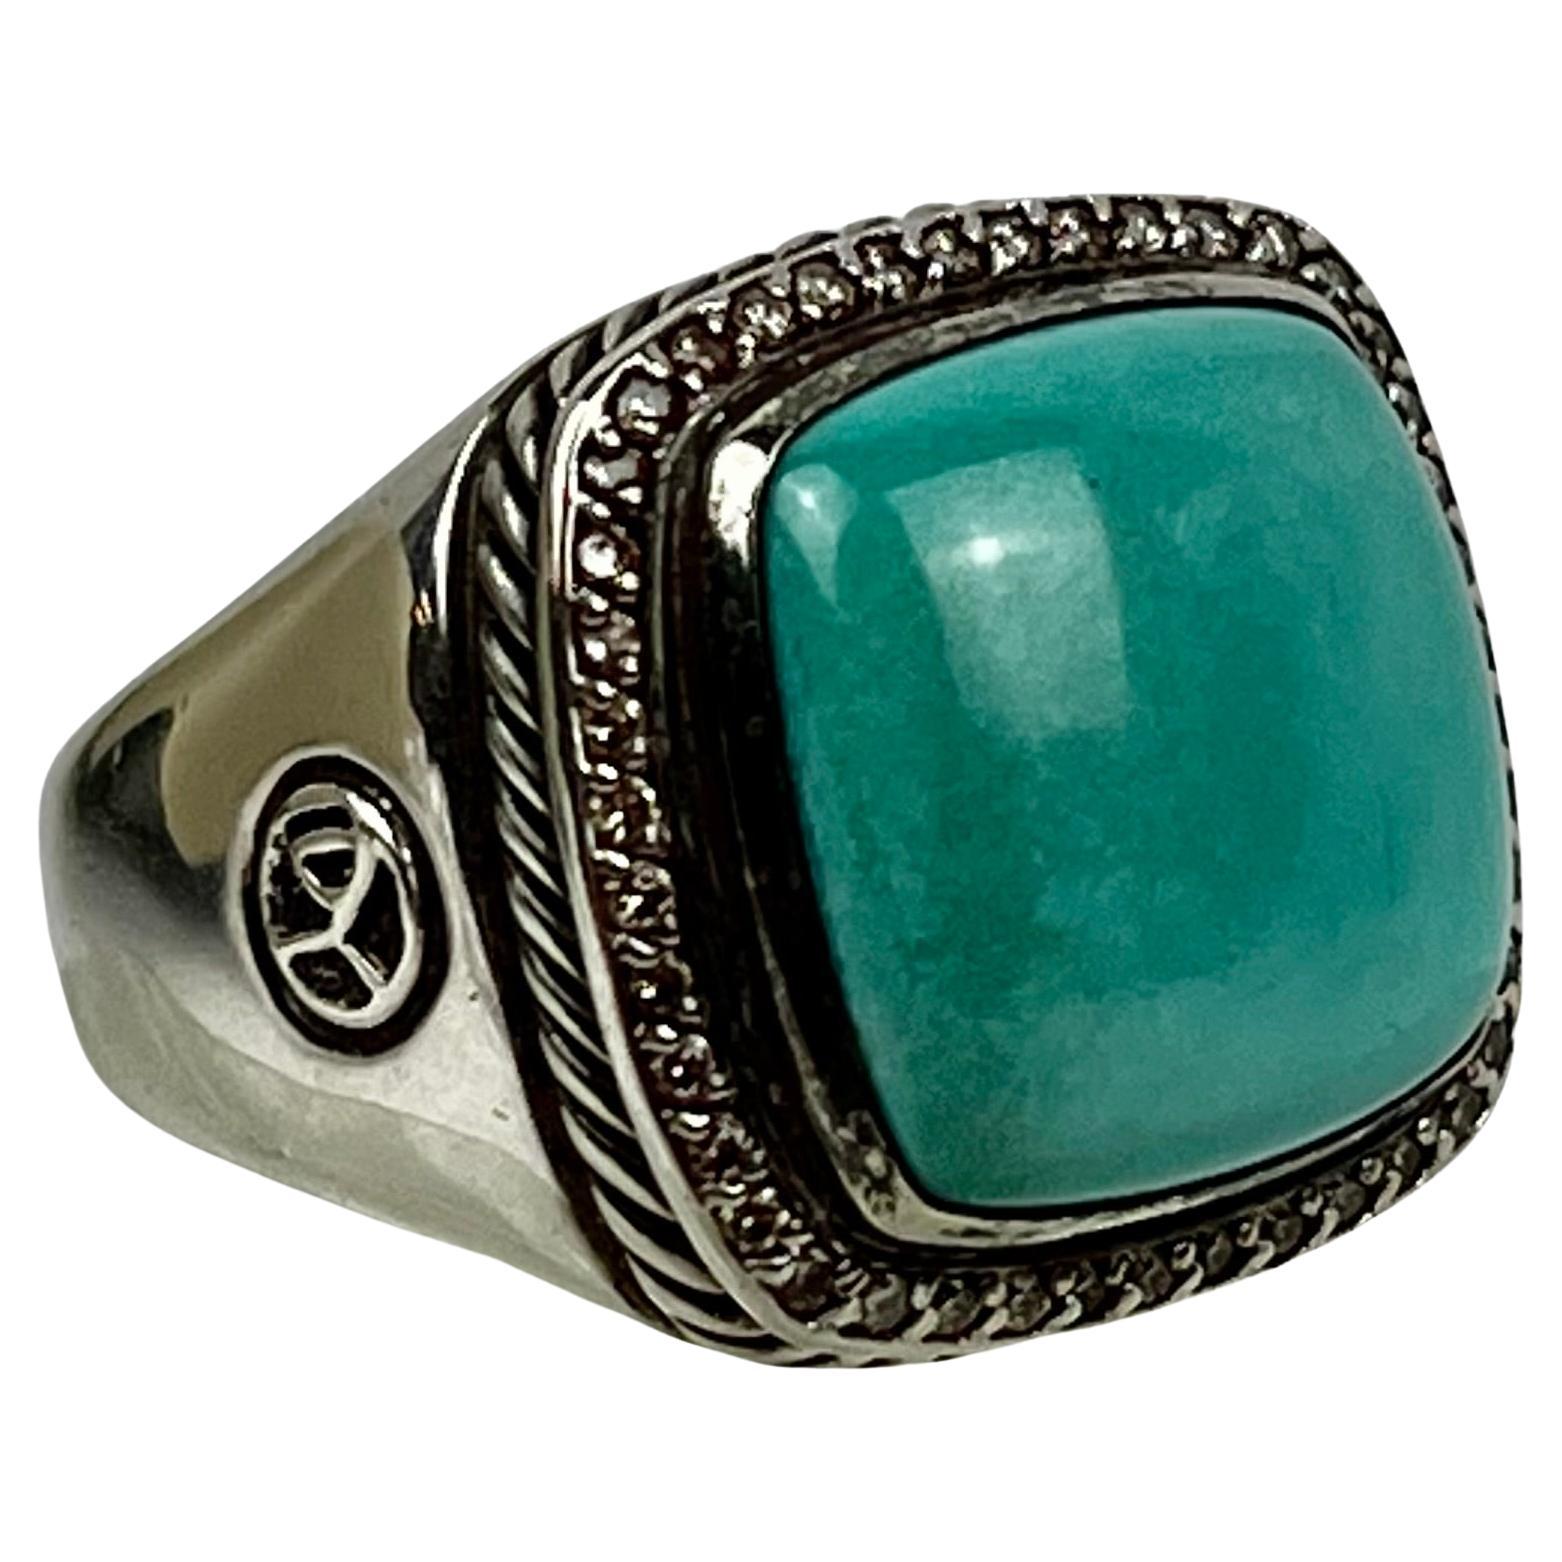 David Yurman's Albion Sterling Silver Ring with Square Cabochon Turquoise Stone